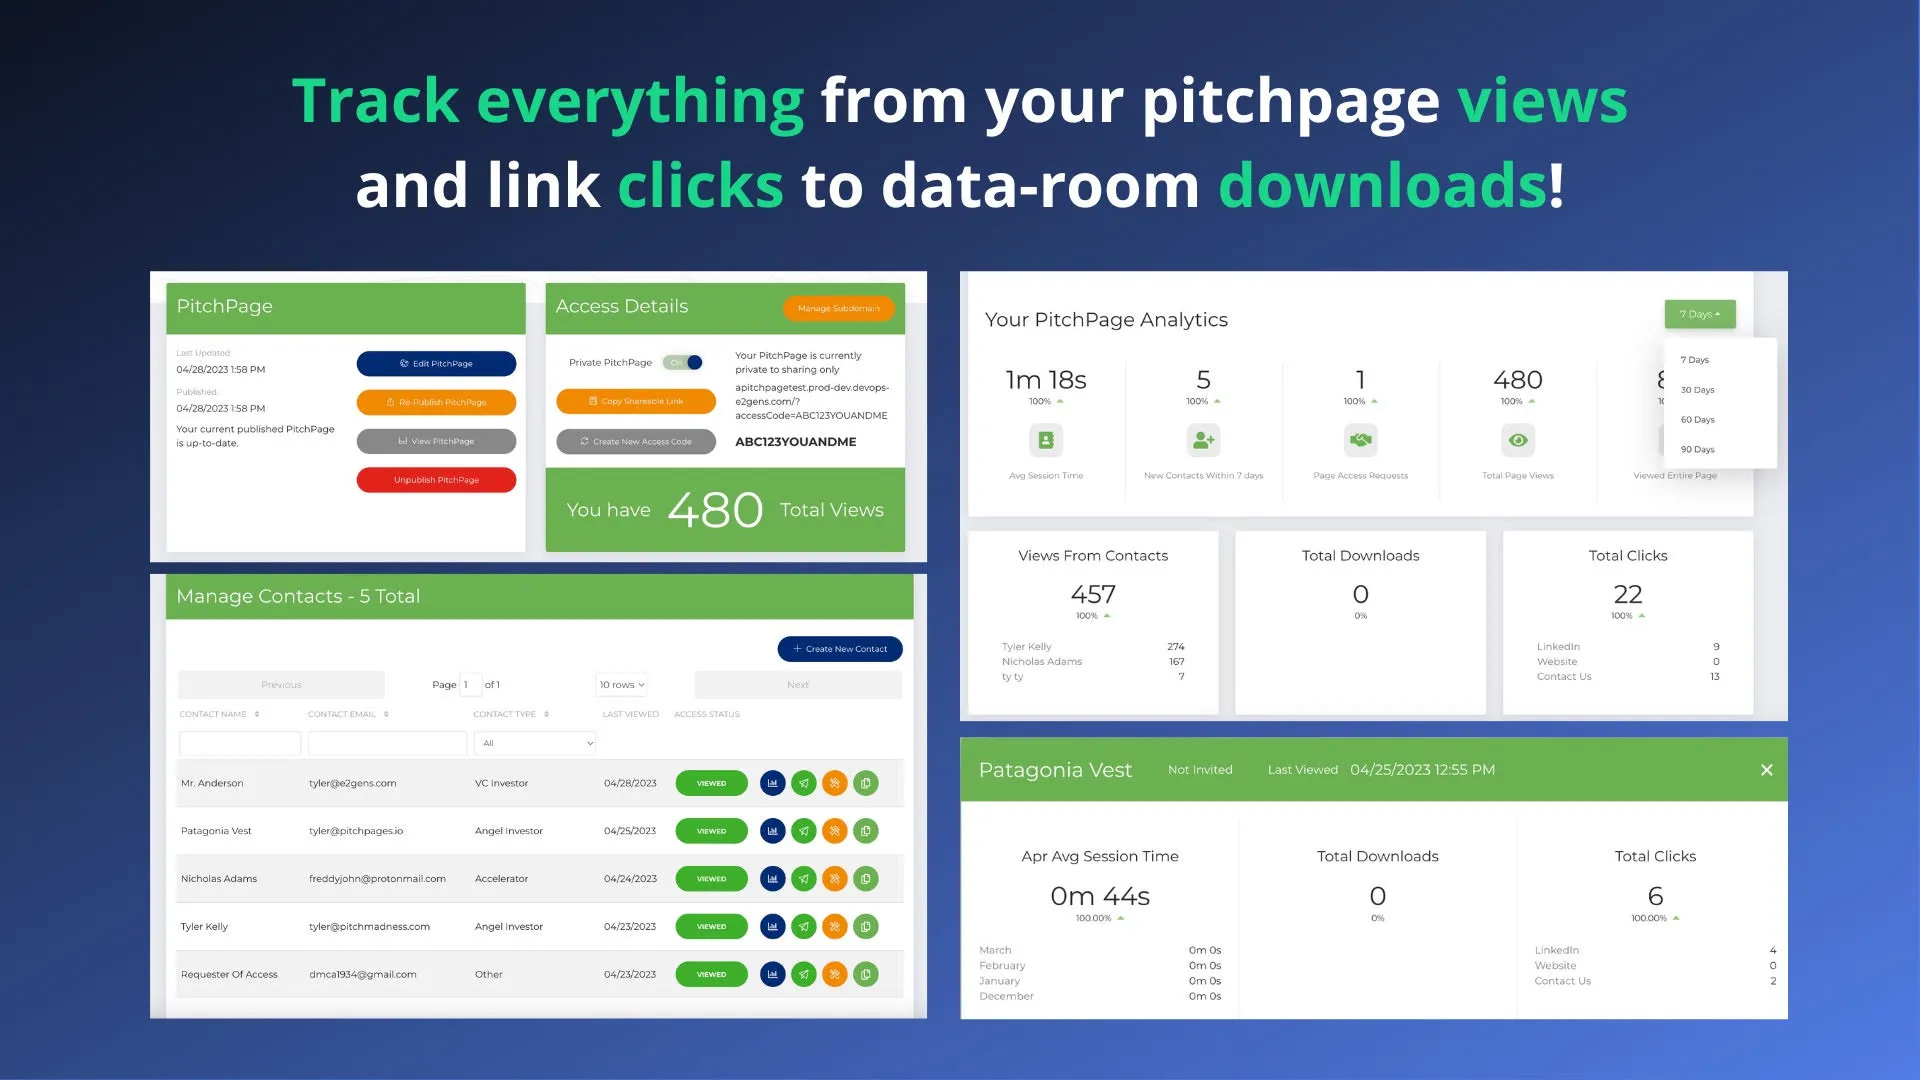 PitchPages is launching our most meaningful update in quite some time on Product Hunt tomorrow. We're rolling out a number of features that help us compete with DocSend including a full analytics dashboard to track engagement, privacy modes for easy sharing and to capture investor emails, and a more robust Investor CRM to manage communications. If you can support us tomorrow, we'd love to continue helping founders get funded faster! 

Check out our page and make sure to Upvote, comment and click the "Visit" button. Thanks Everyone 🙏 https://www.producthunt.com/products/pitchpages